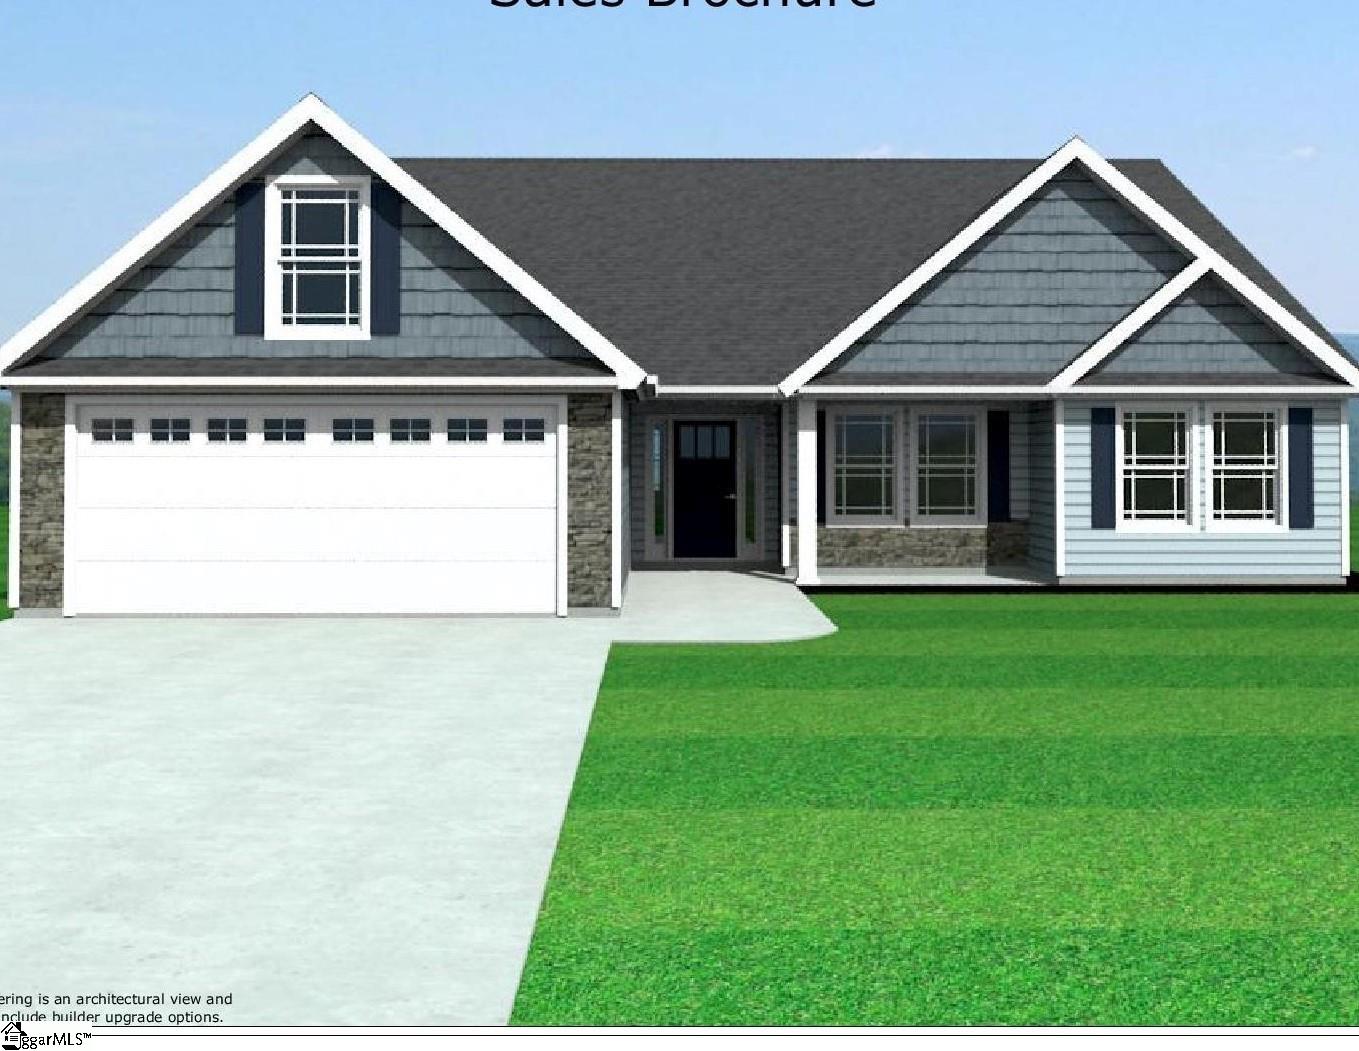 Looking for a BRAND NEW HOME on a ONE ACRE LOT?? Construction beginning soon on this 4 bedroom 2 bathroom open concept home, the DRAYTON floorplan, featuring tray ceiling with rope lighting in the master bedroom, granite countertops, gas fireplace, walk in laundry room, upgraded painted cabinets, covered 12x12 porch as well as uncovered 10x12 patio.  Contact listing agent today for more information!